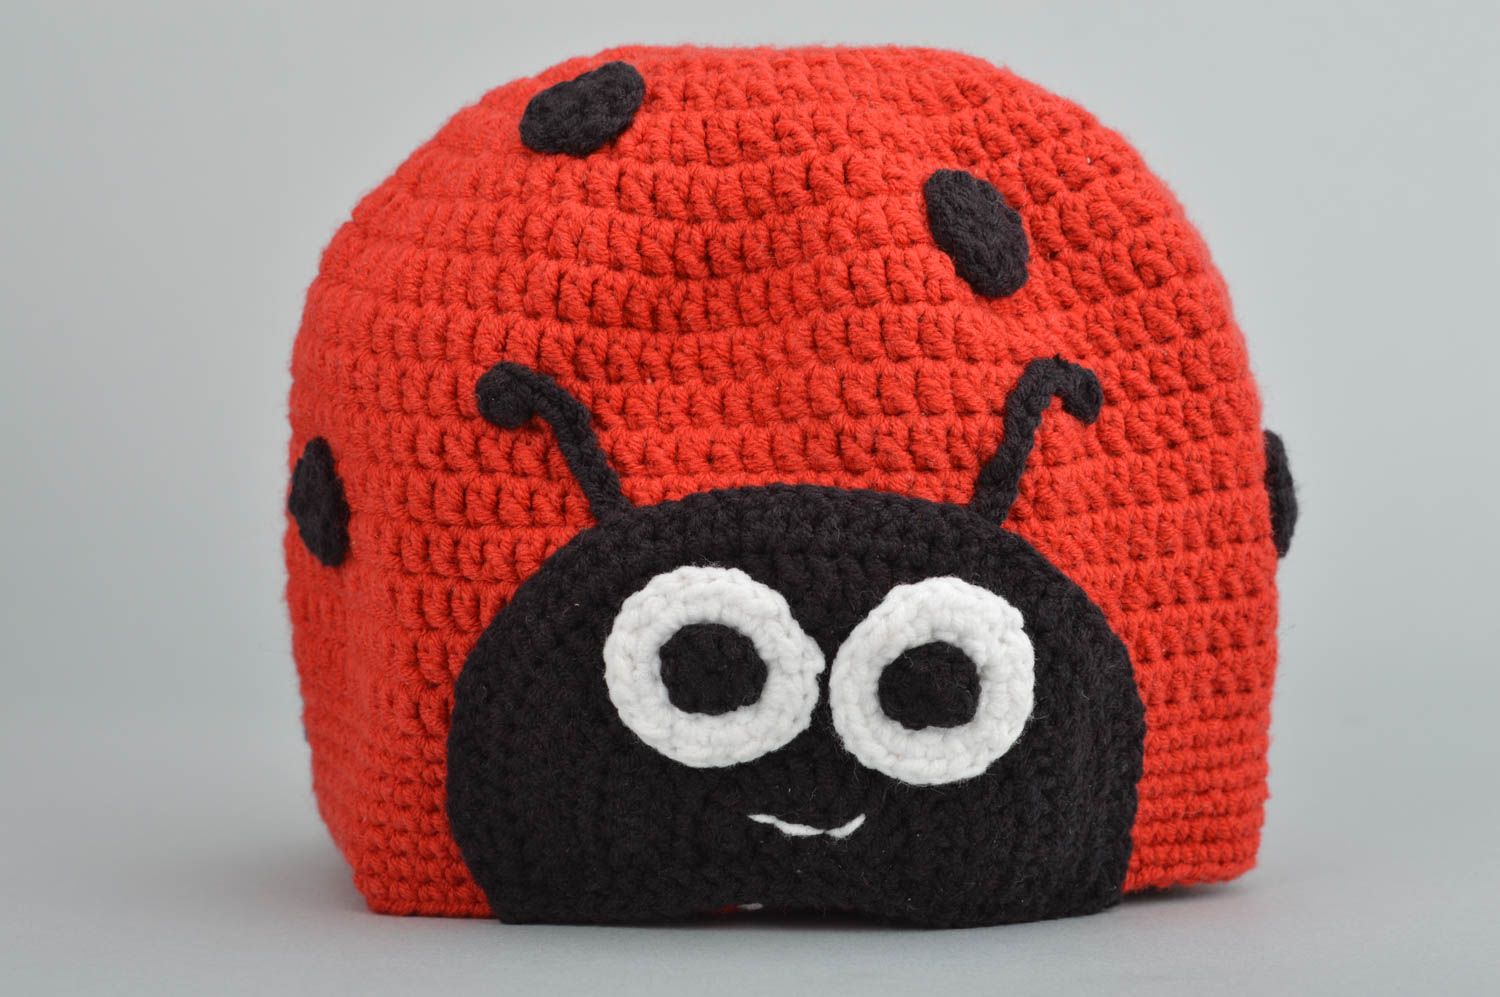 Handmade accessory crocheted hat ladybug cap red and black colors gift for girl photo 3